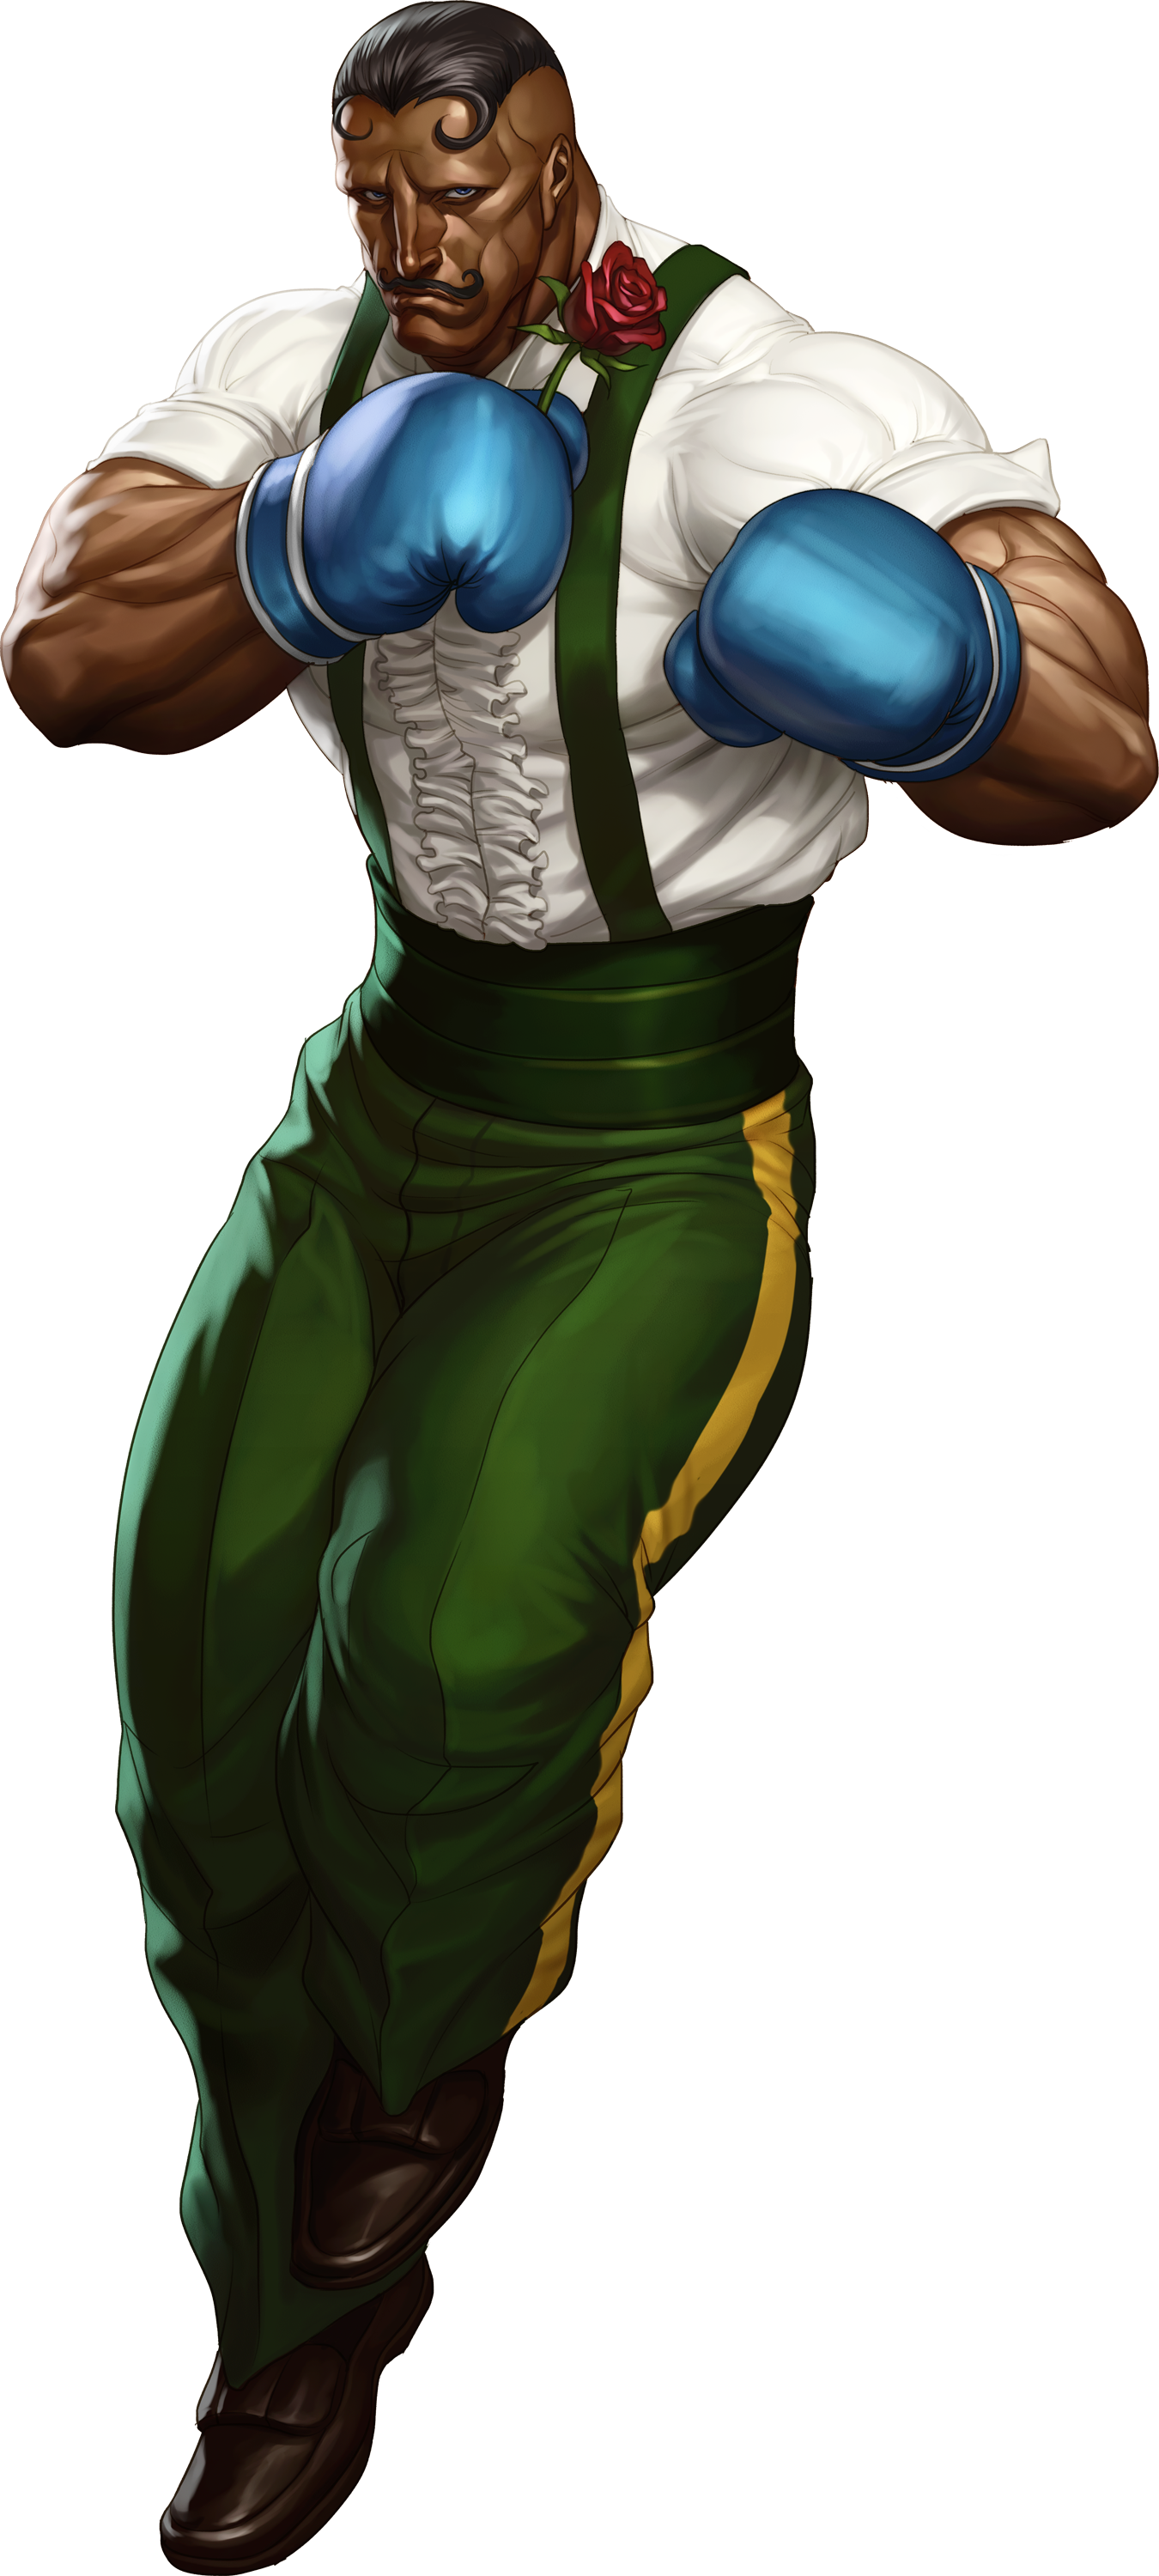 street fighter 3 3rd strike characters